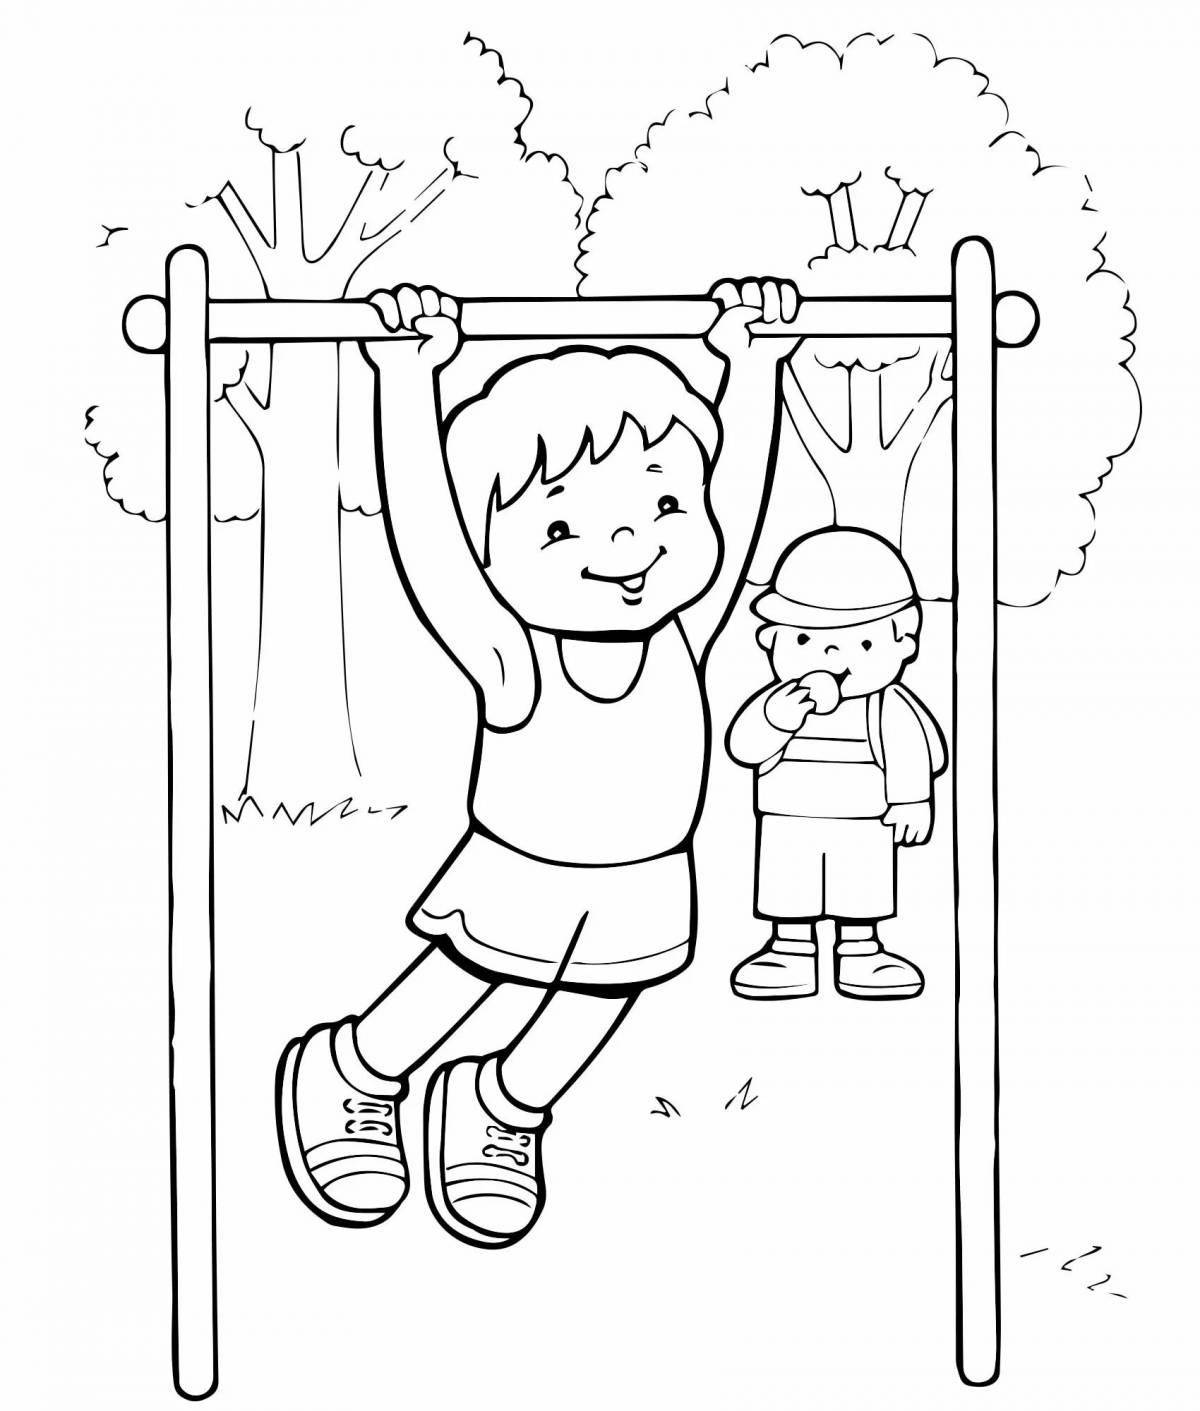 Healthy lifestyle for preschoolers #12